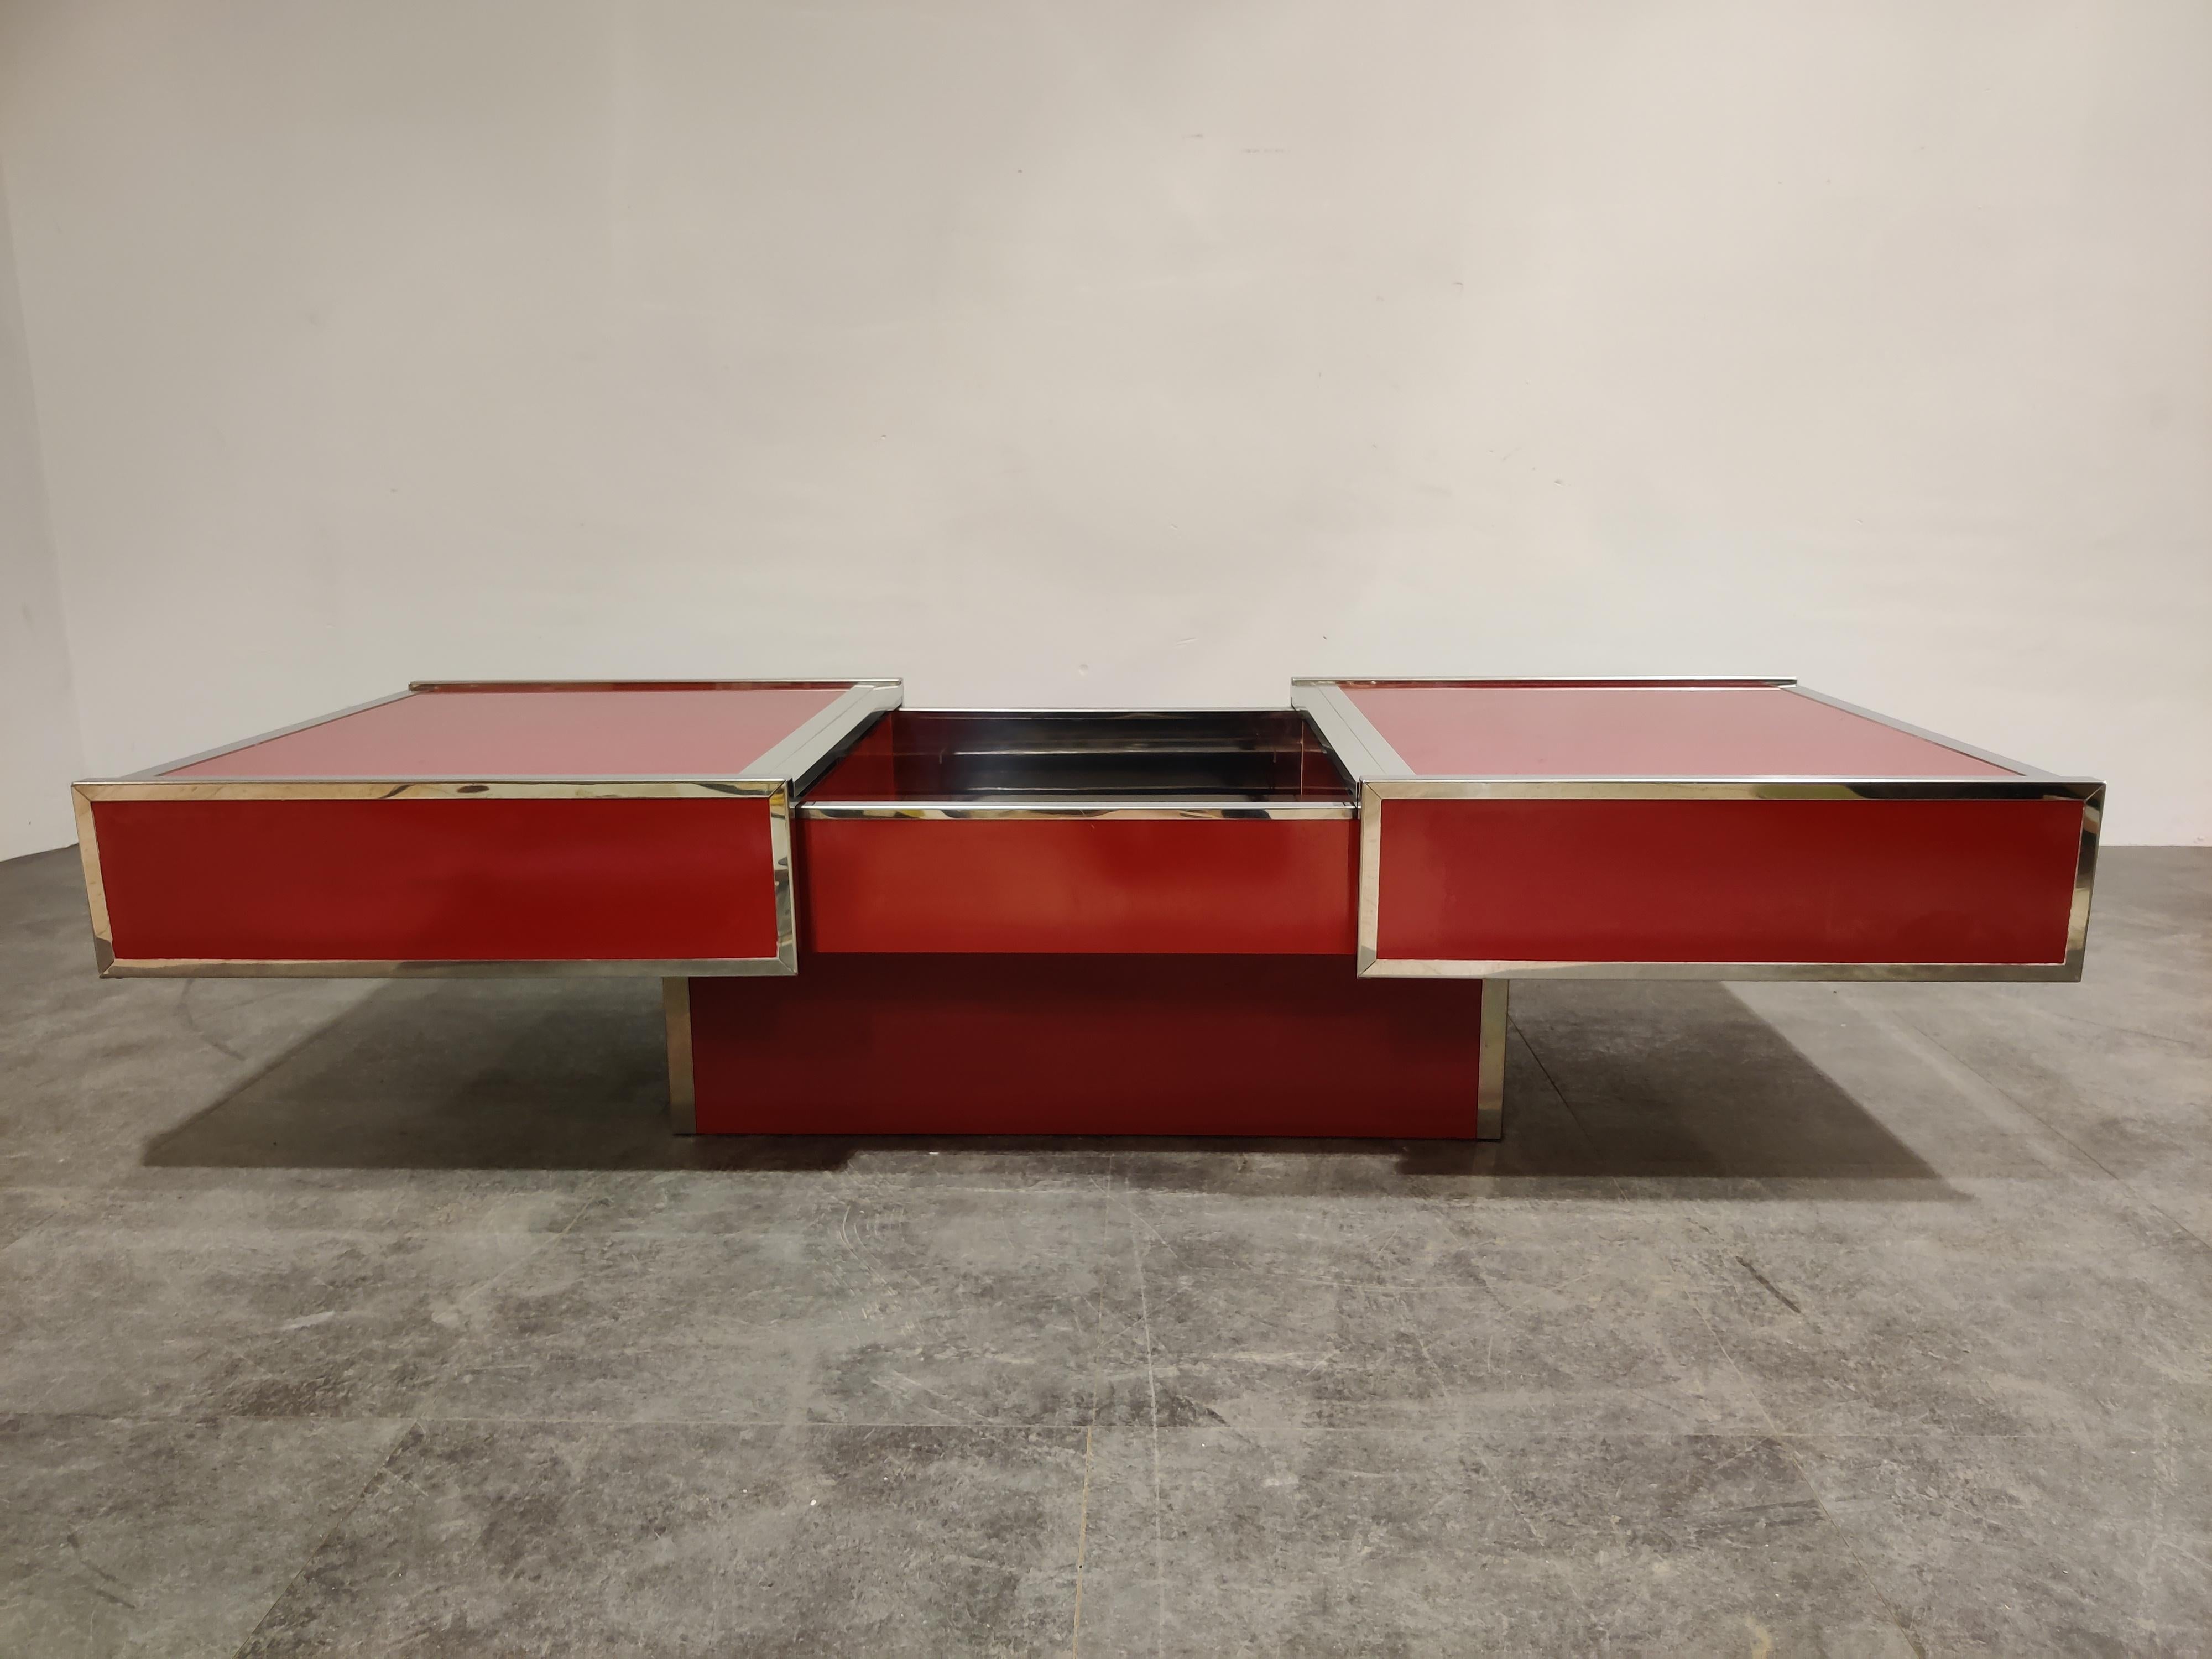 Eye catching red lacquered metal and chrome hidden bar coffee table.

The tables tops slide open to reveal a chromed bar compartment.

Very much in the style of Willy Rizzo.

Rare piece to find in a bright red colour.

Good condition, small